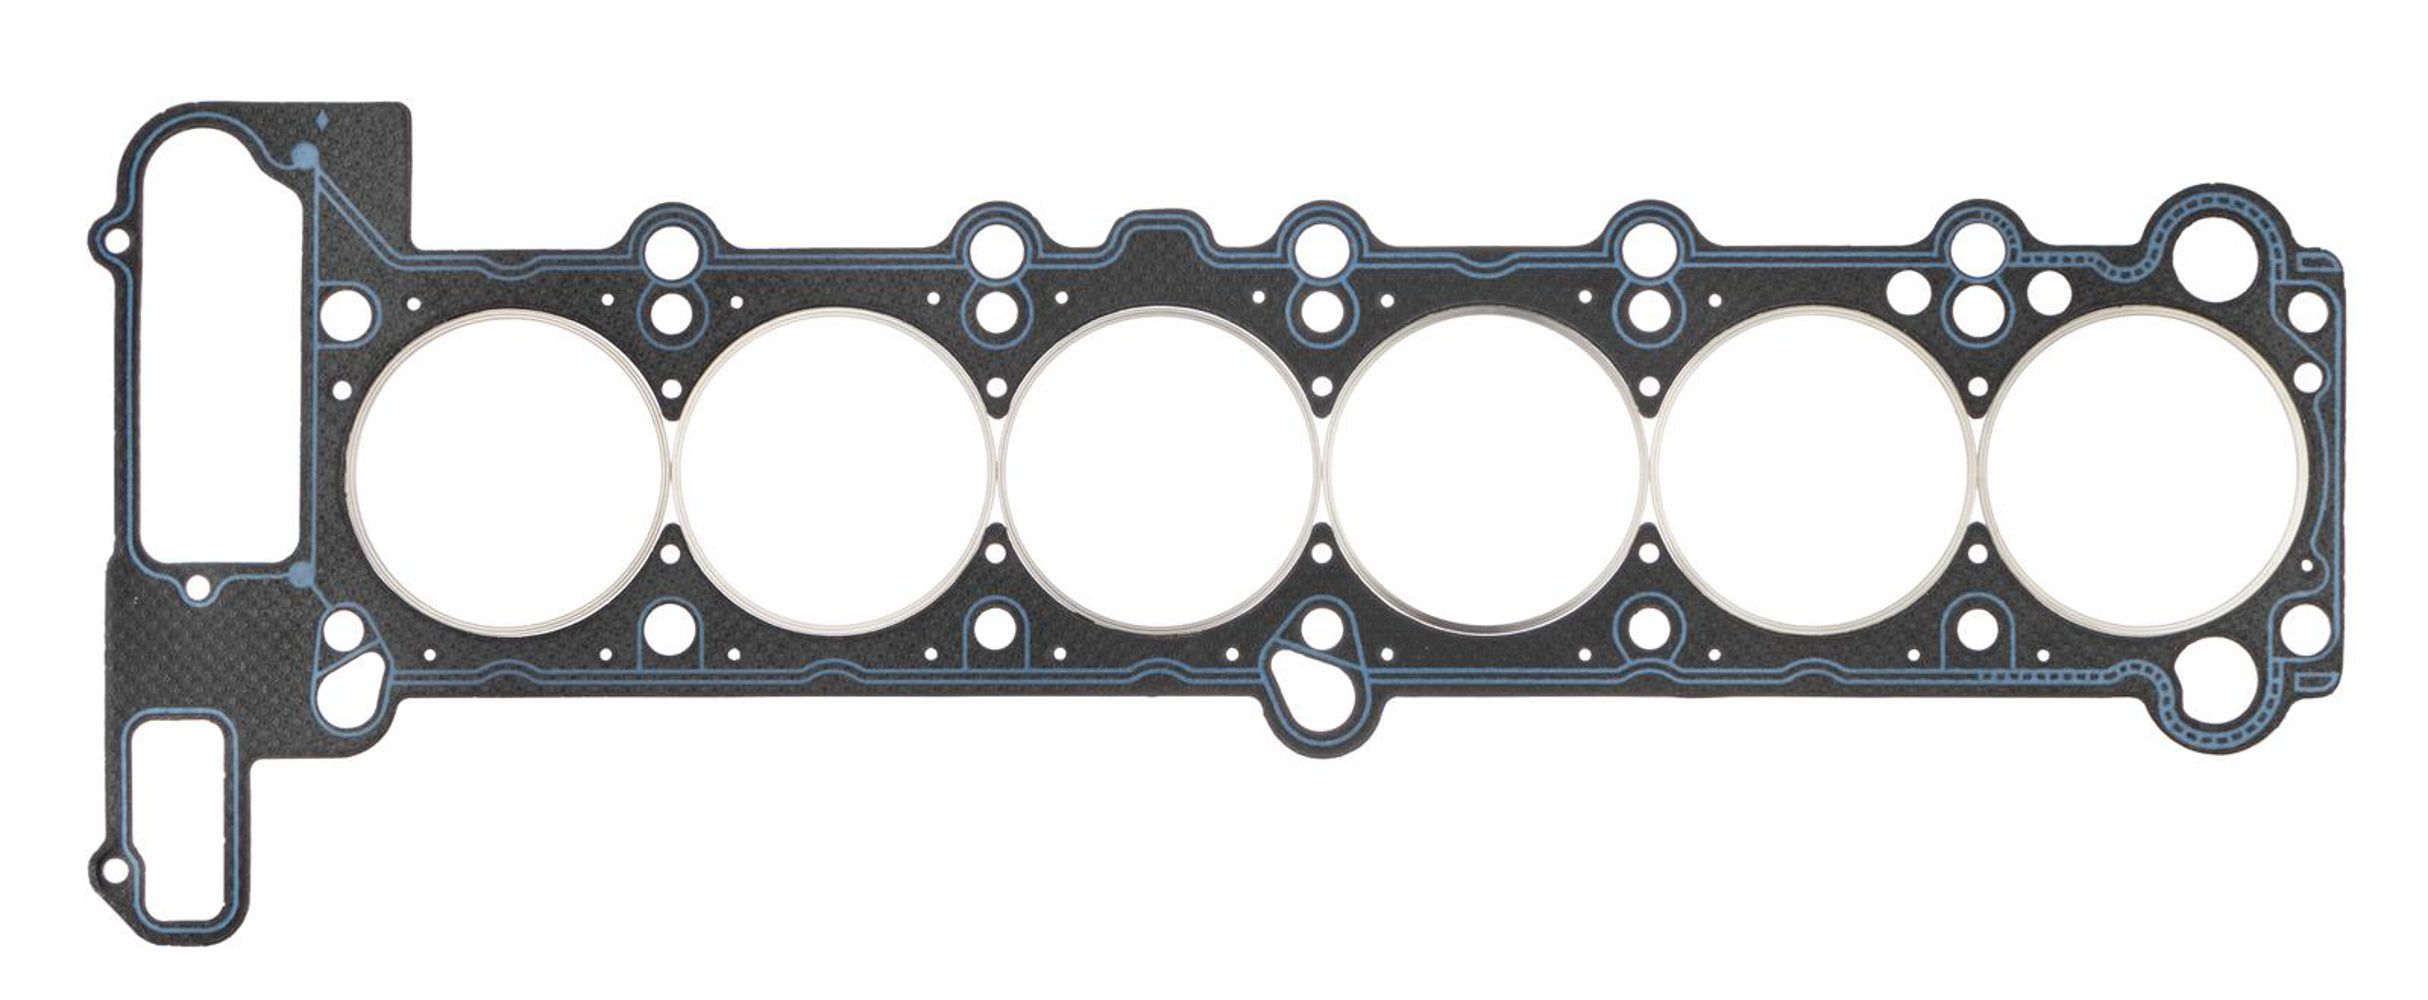 SCE Gaskets CR330013 - Cylinder Head Gasket, Vulcan Cut Ring, 86.00 mm Bore, 2.00 mm Compression Thickness, Steel Core Laminate, BMW Inline-6, Each